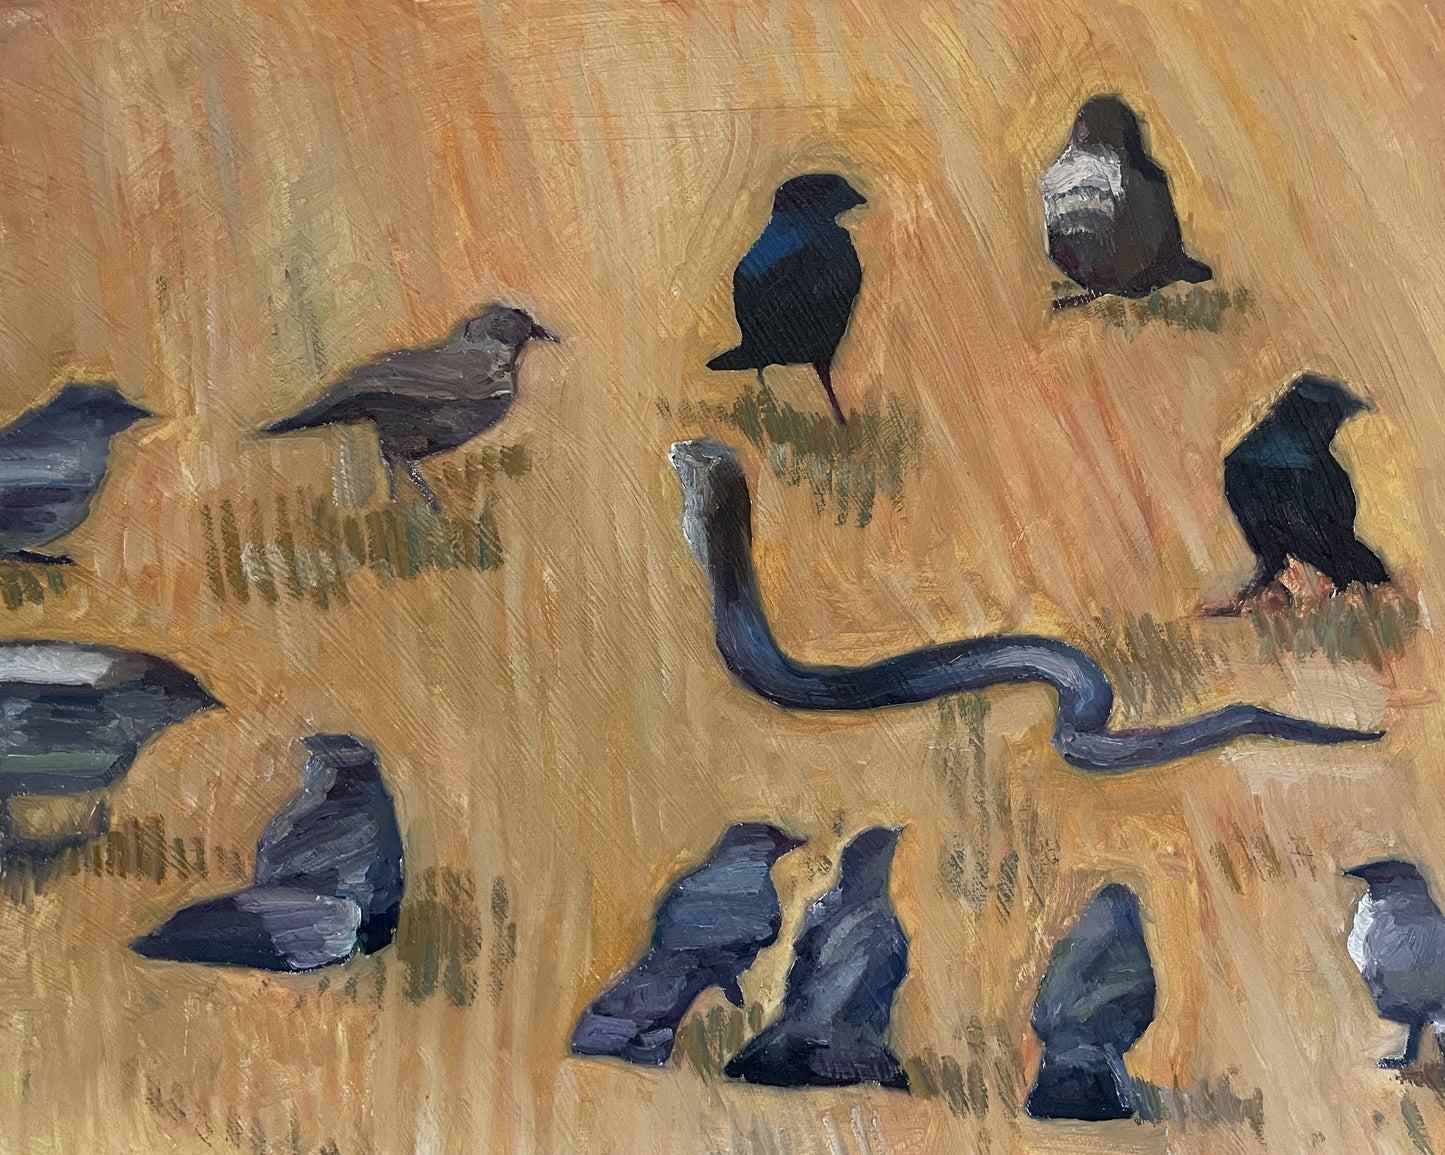 Snake and Birds, 2023, oil on canvas, 16 x 20 in. / 40.64 x 50.8 cm.